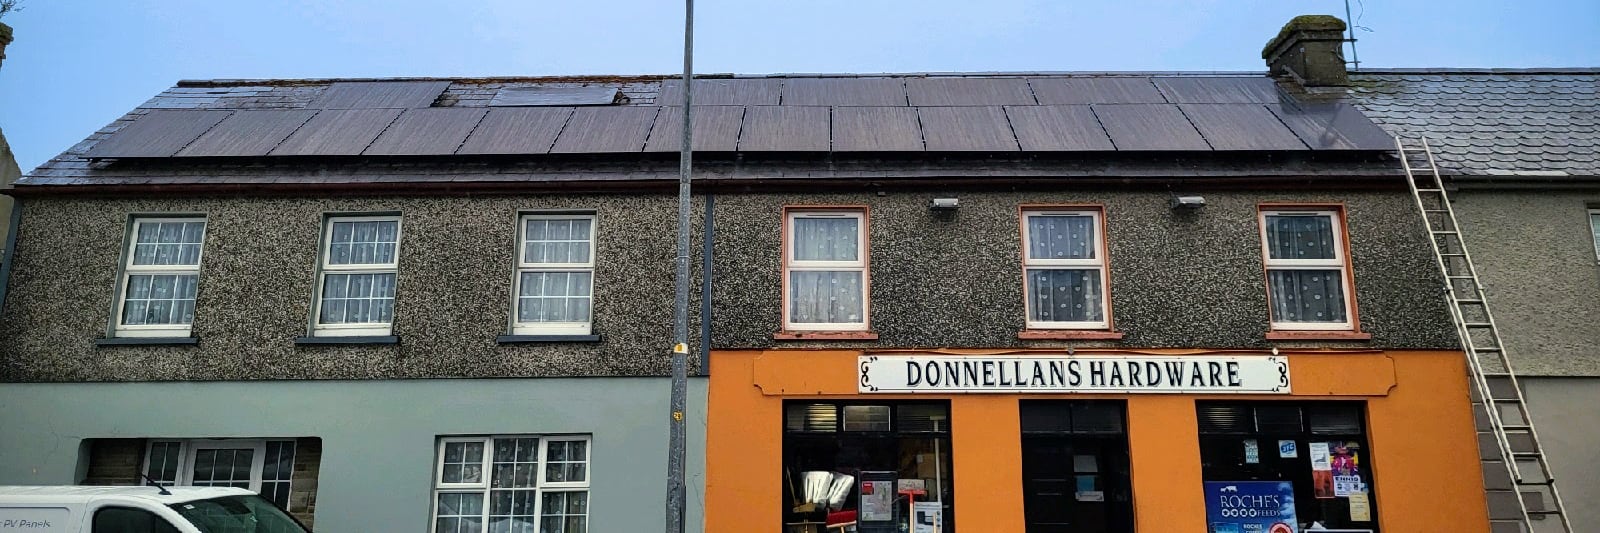 Solar panels on a shop in Ireland